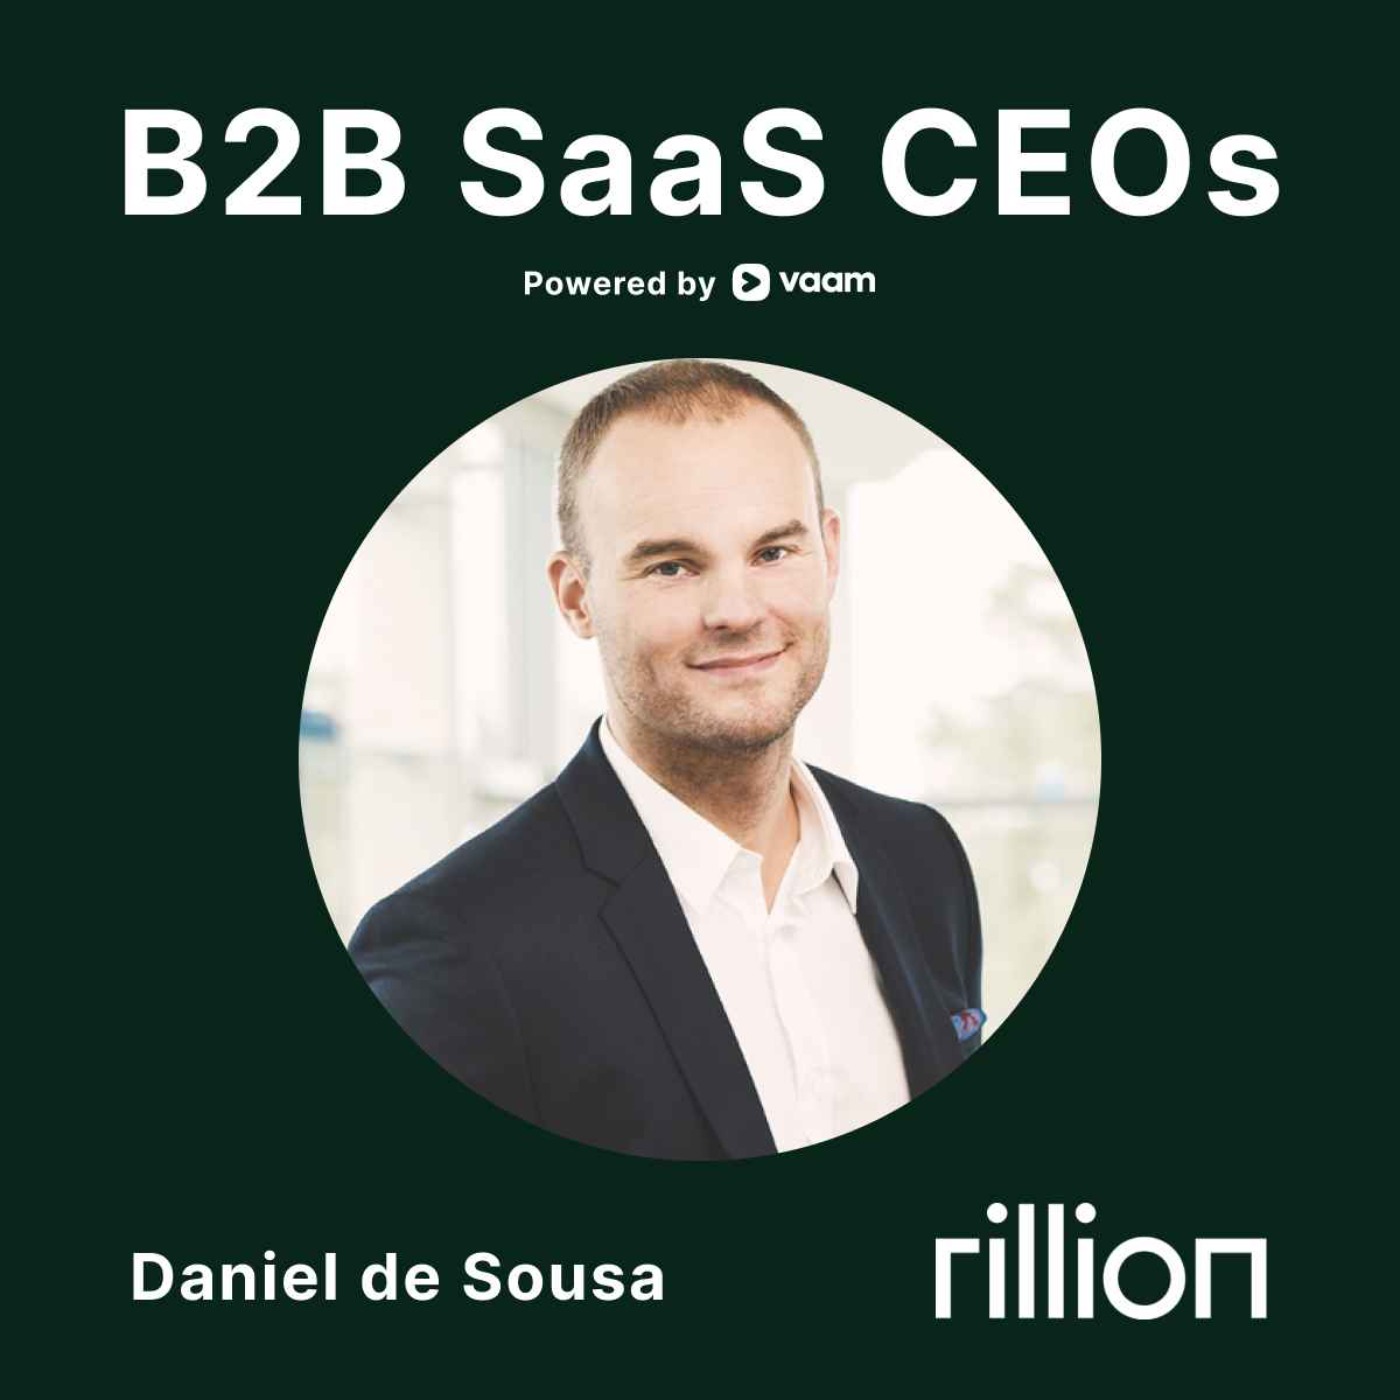 95. Are you speculating or using facts? - Daniel de Sousa (Rillion)